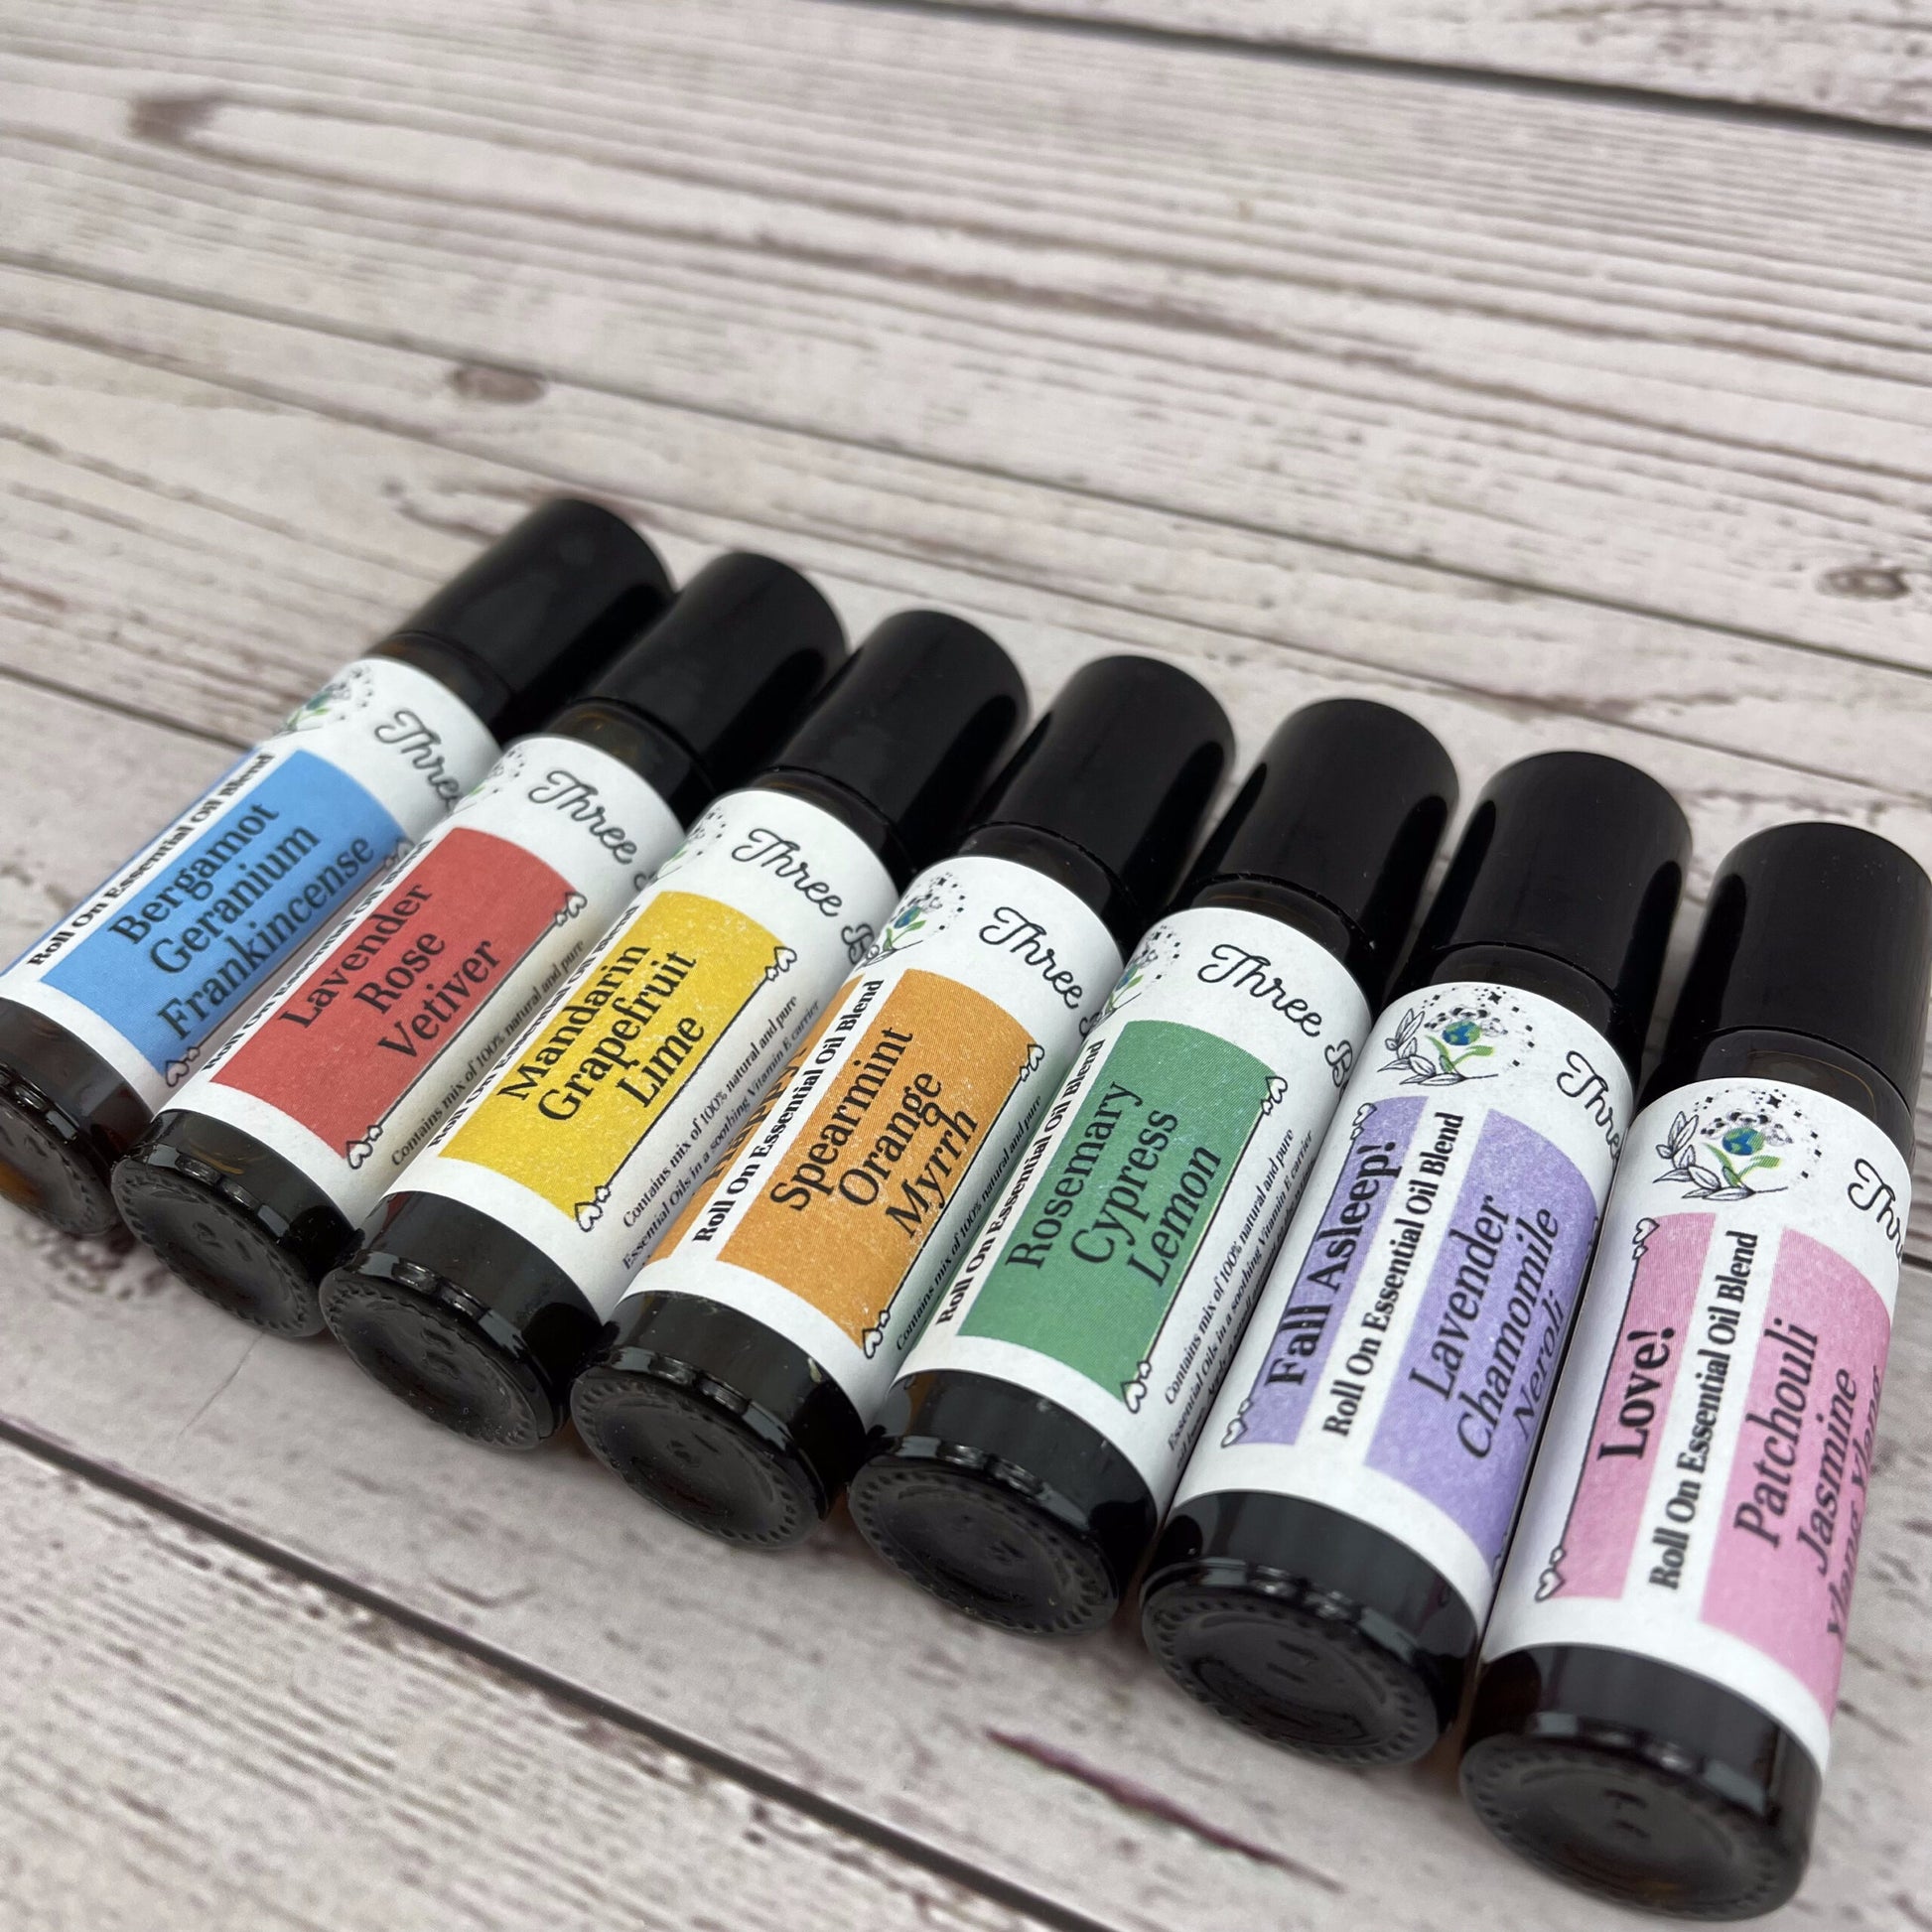 Essential oil roll on blends